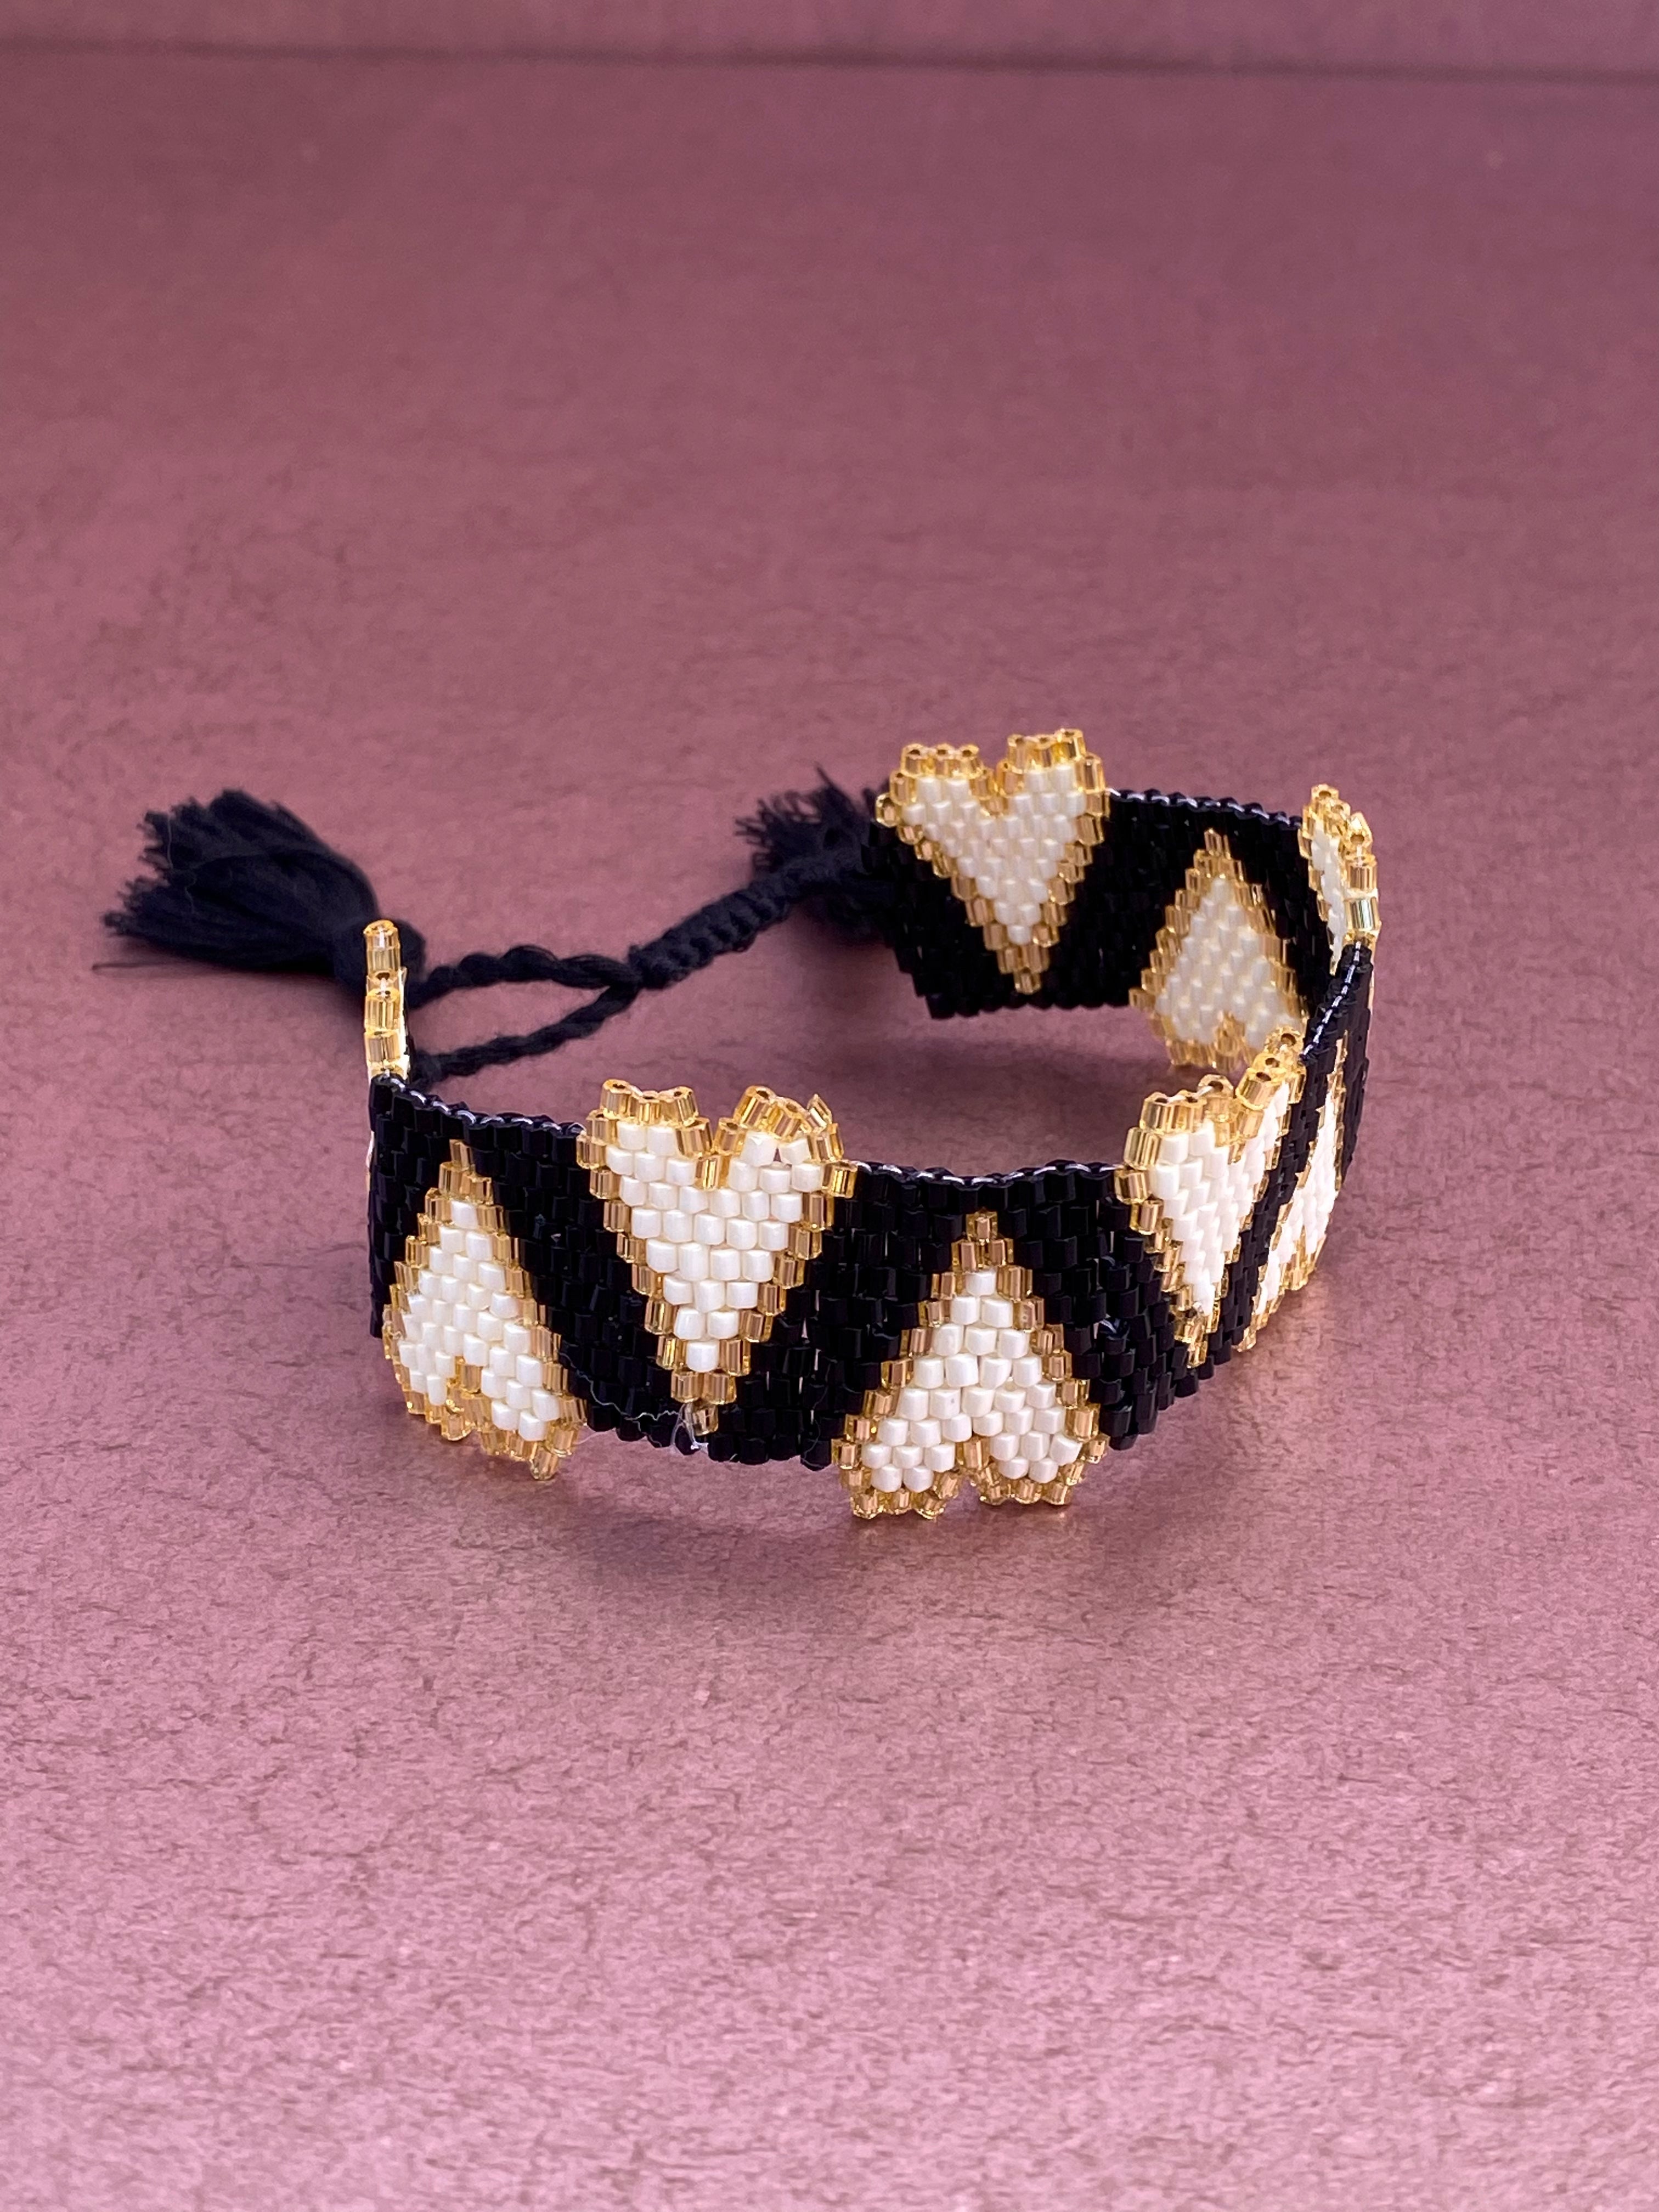 Beaded Bracelet Black with White Hearts Trimmed in Gold Tassel Closure